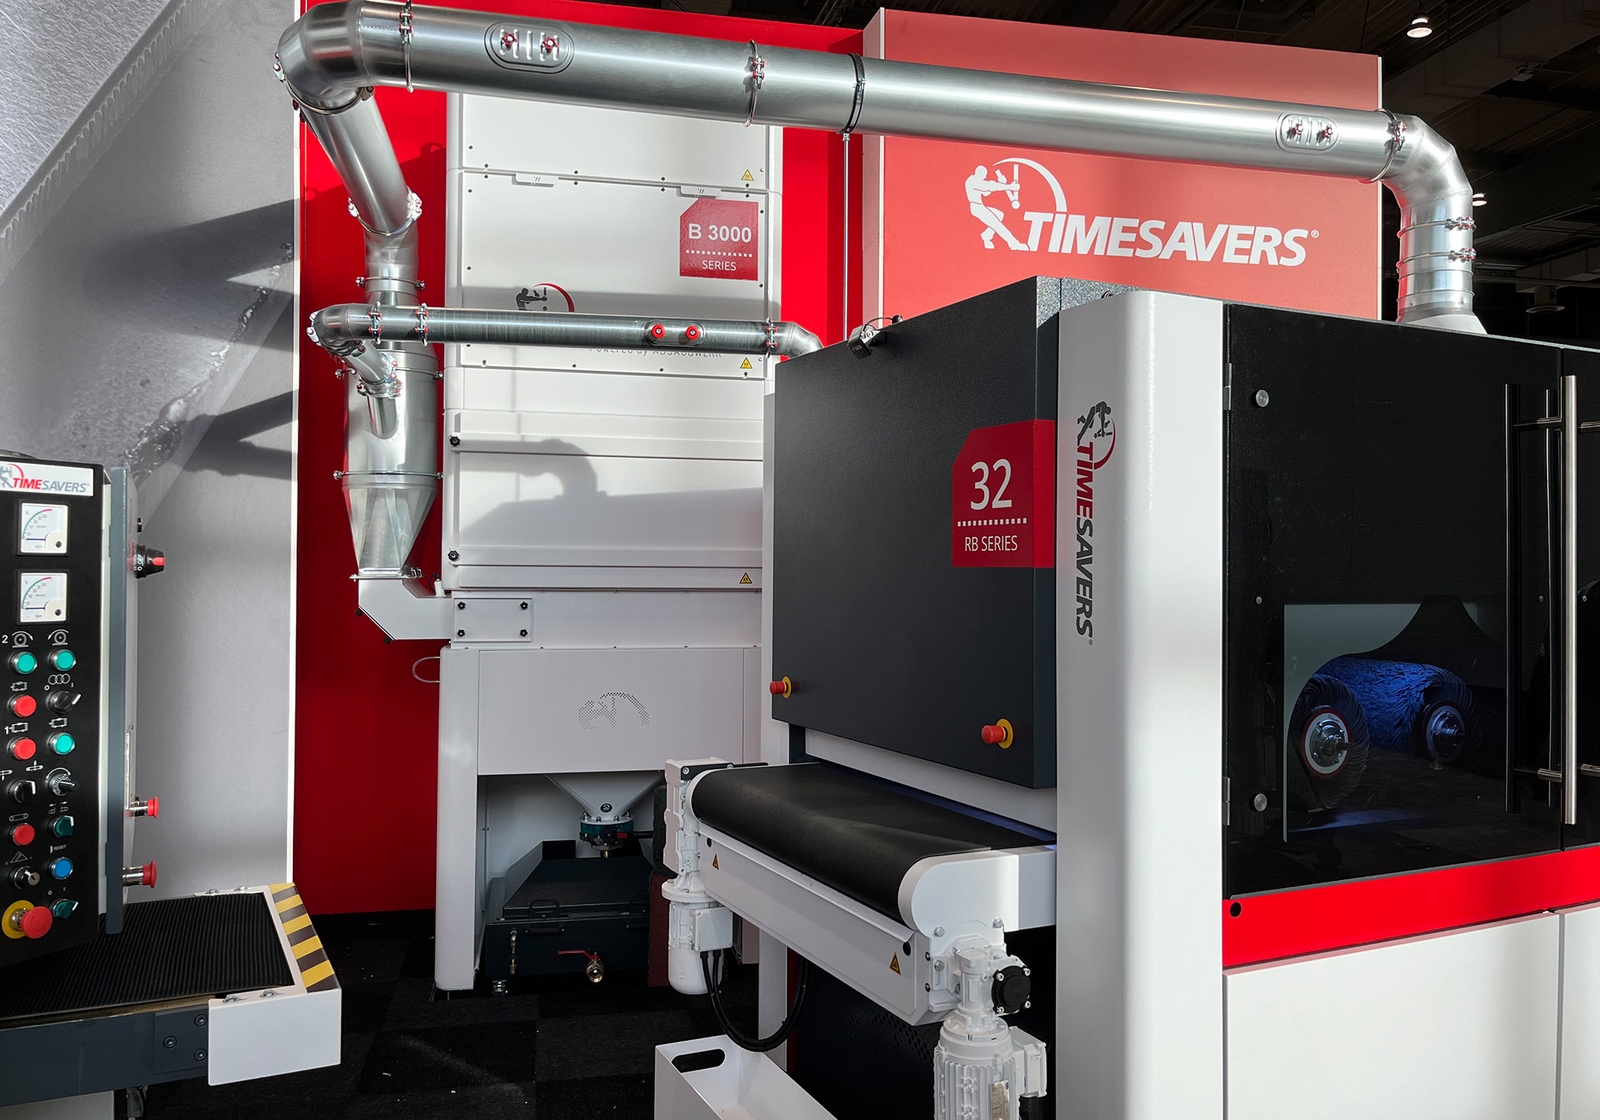 Timesavers launching the most advanced model at EuroBLECH